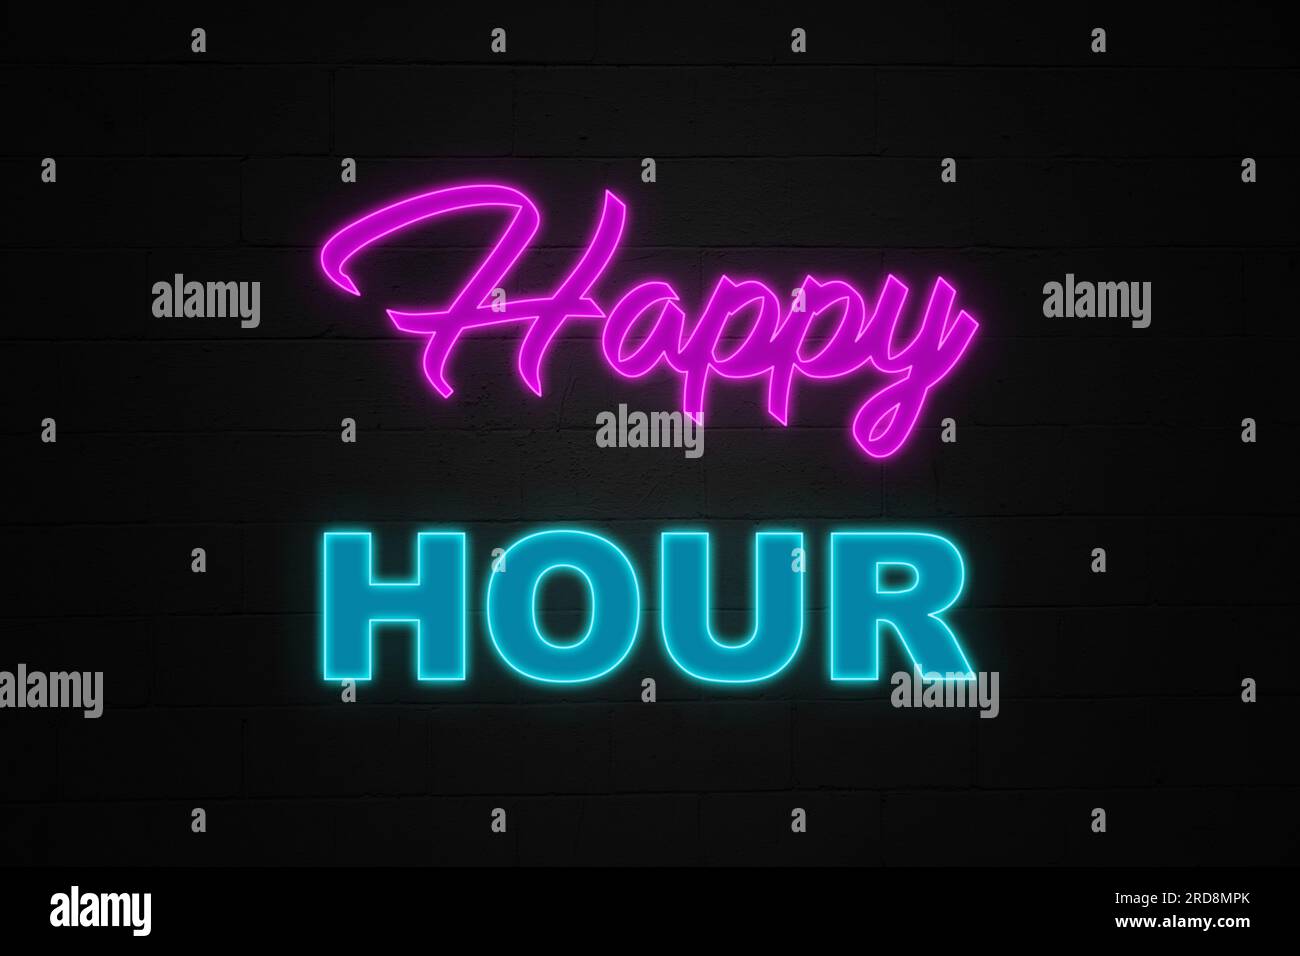 Neon light “Happy hour” designed in a eighties style Stock Photo